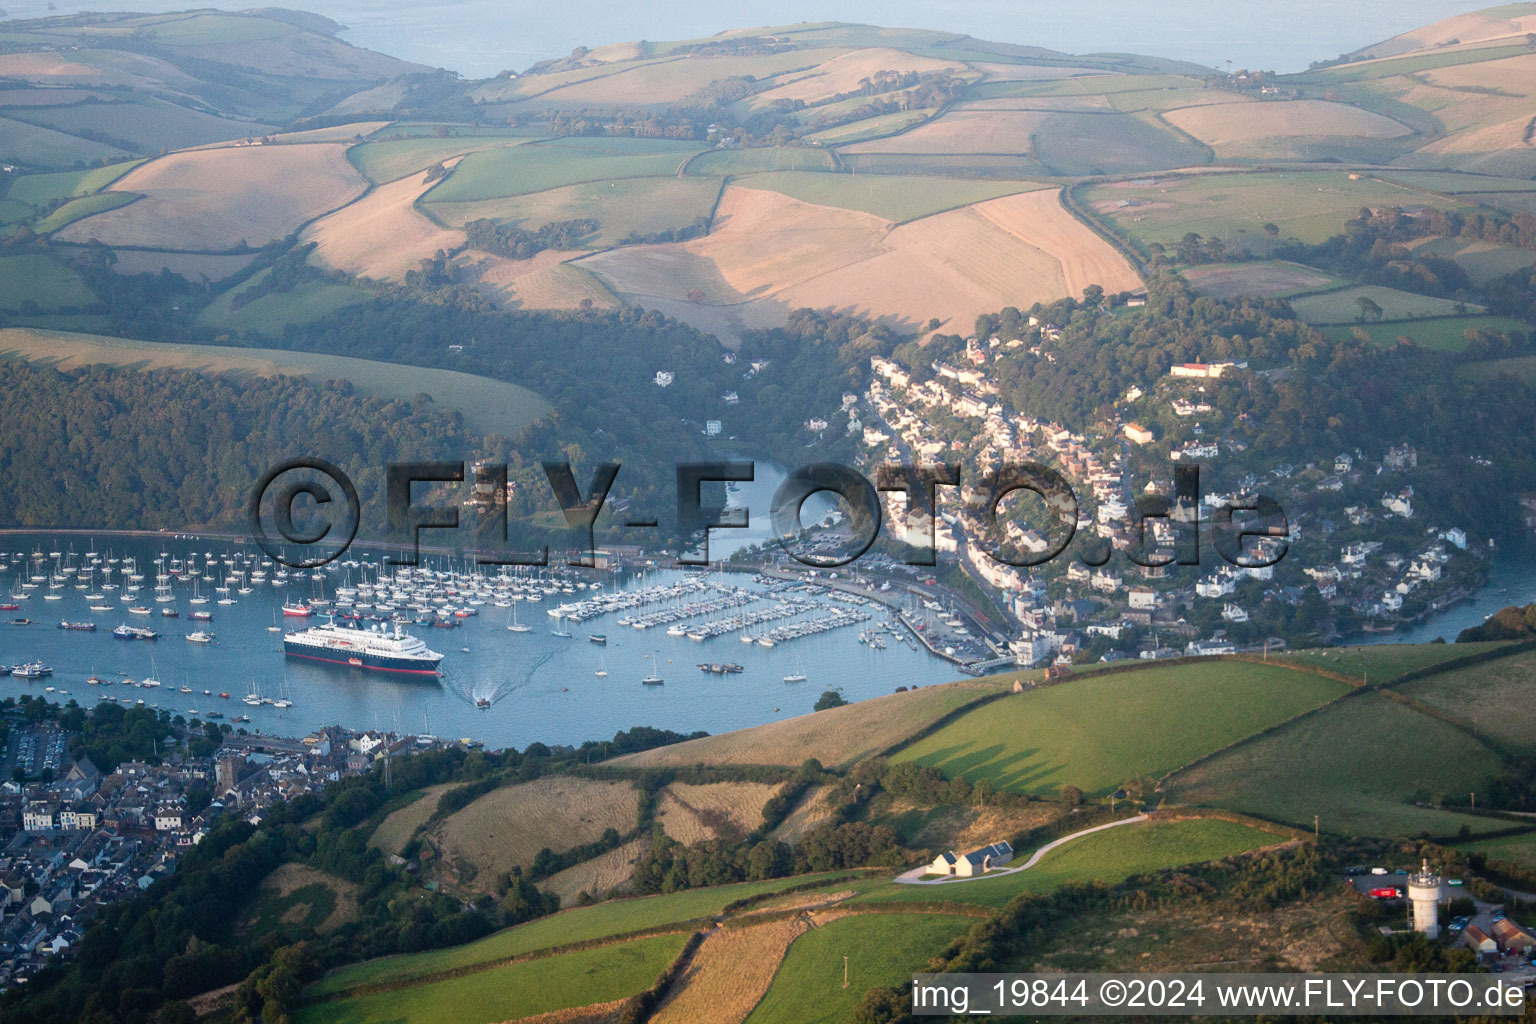 Riparian areas along the river mouth of Dart river in Dartmouth in England, United Kingdom